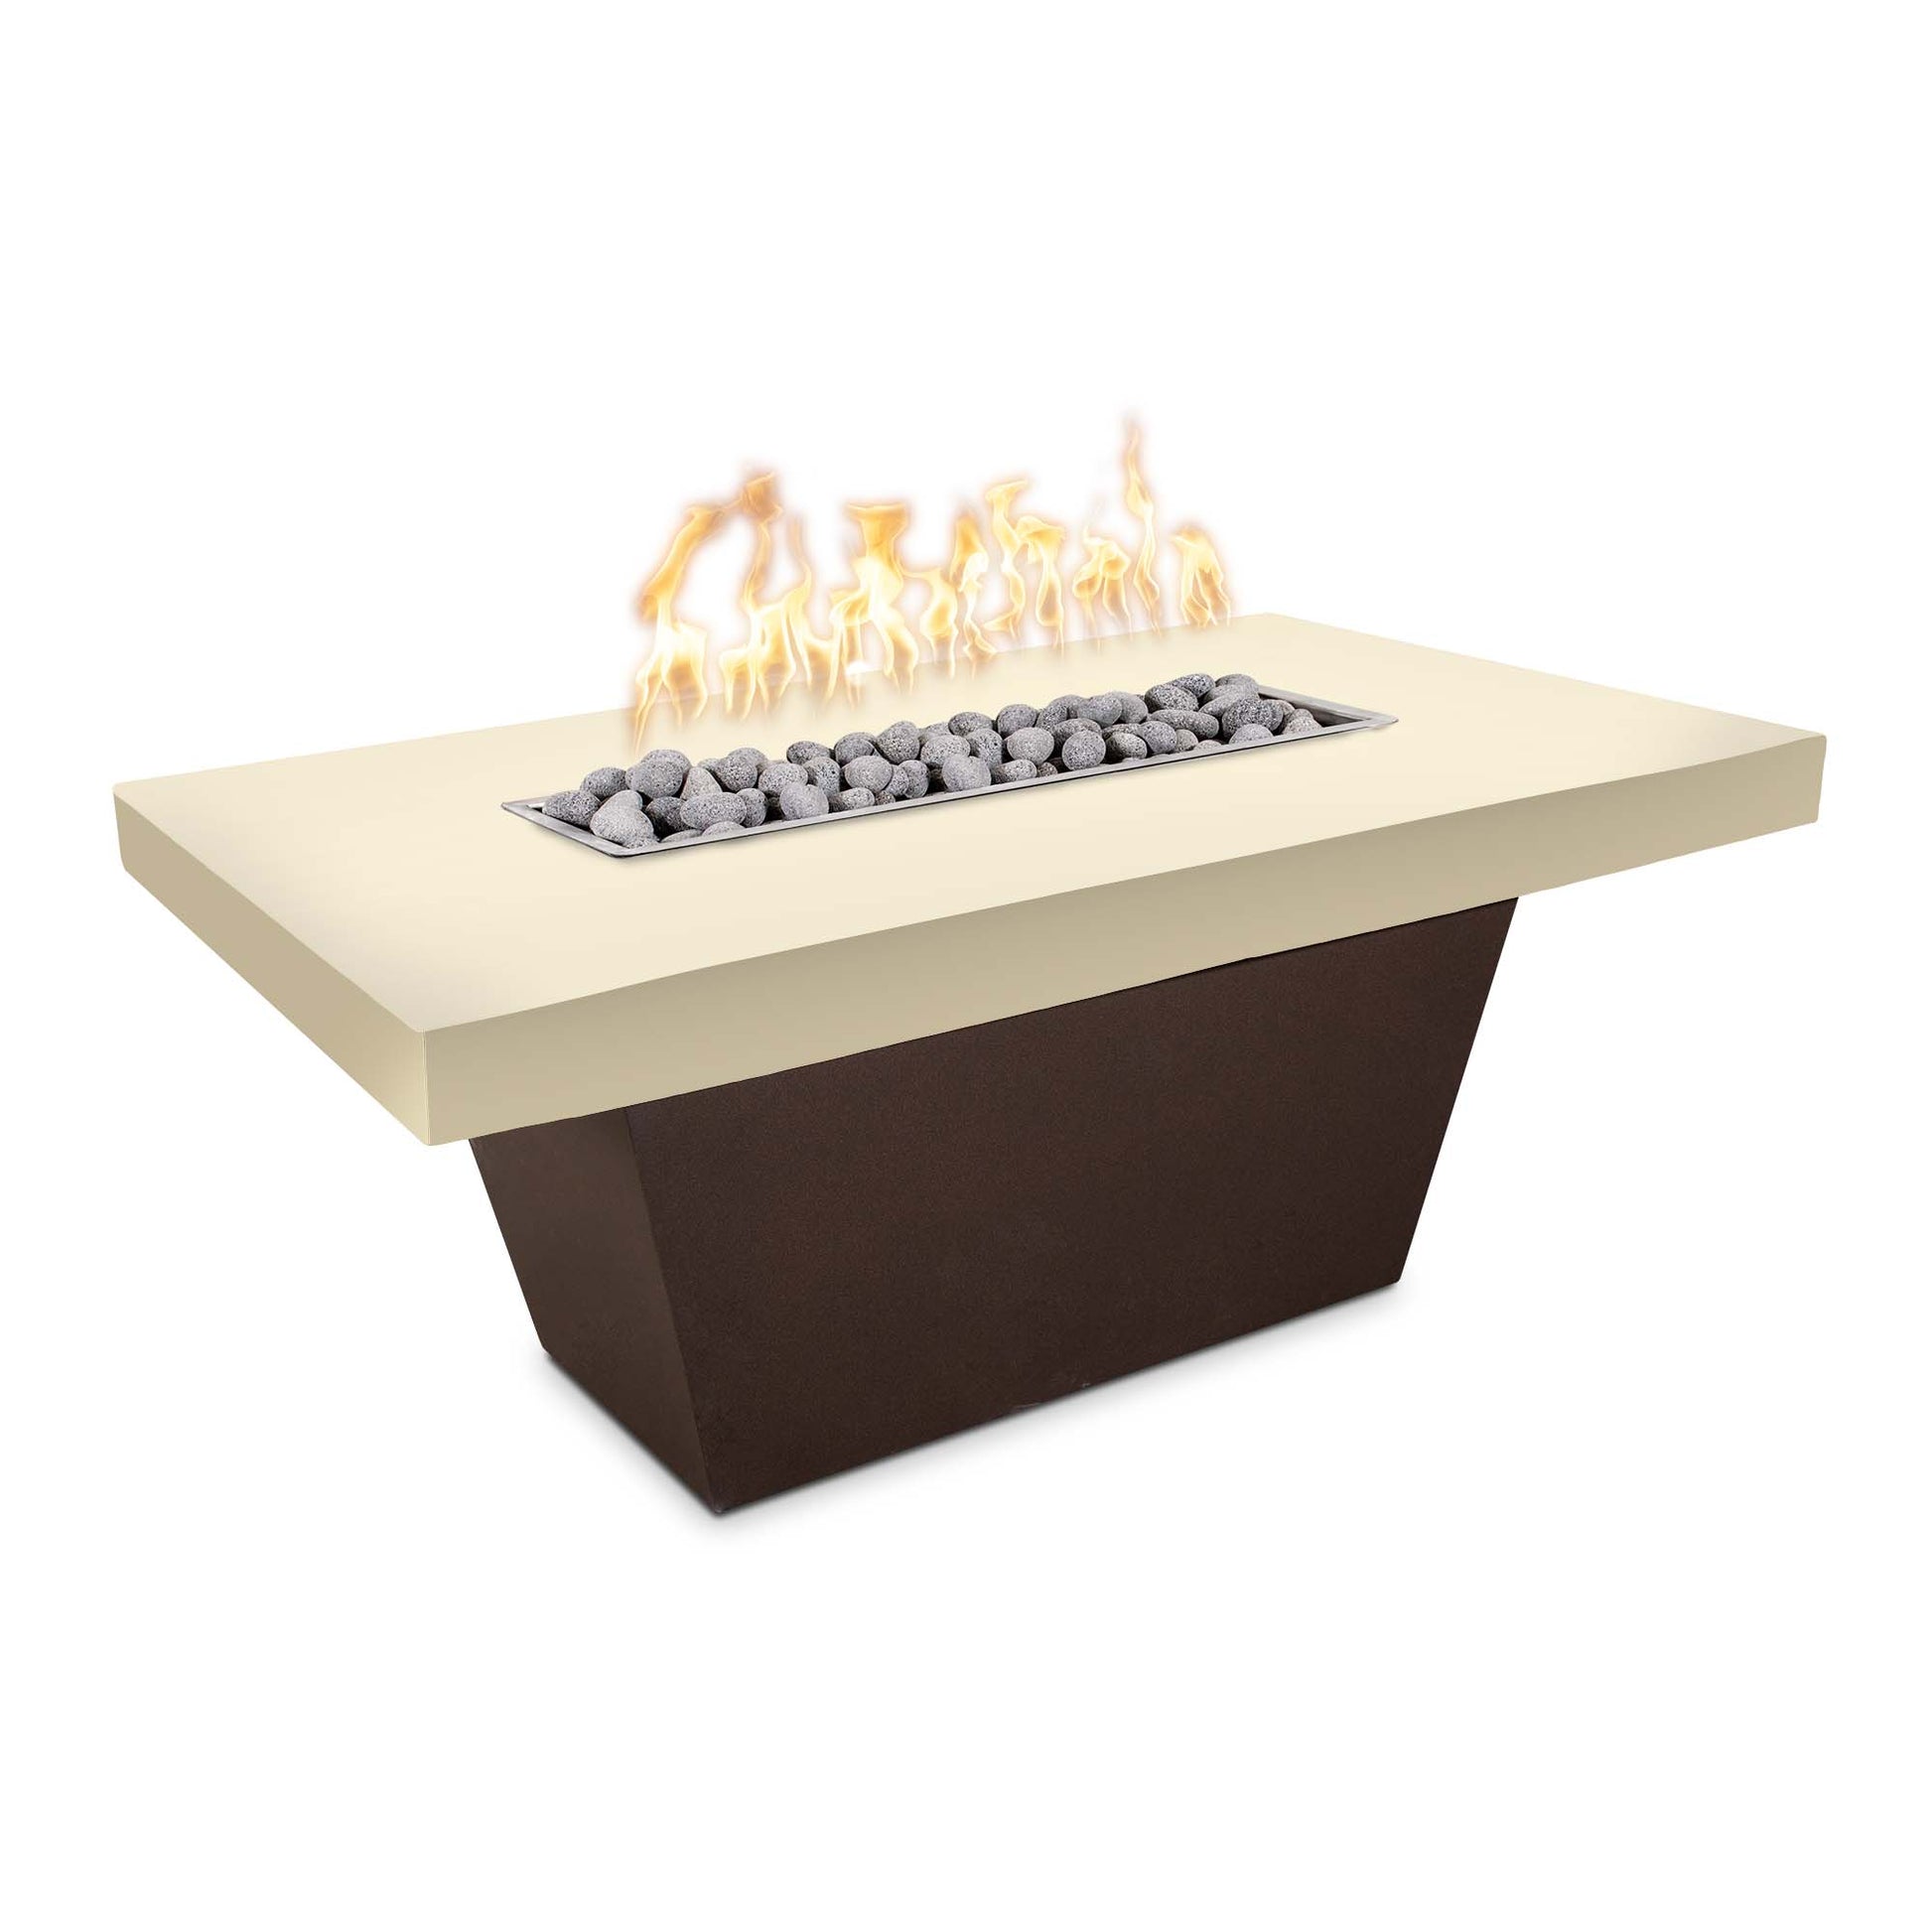 The Outdoor Plus Tacoma 48" Rustic Gray Concrete Top & Black Powder Coated Base Natural Gas Fire Table with Match Lit Ignition